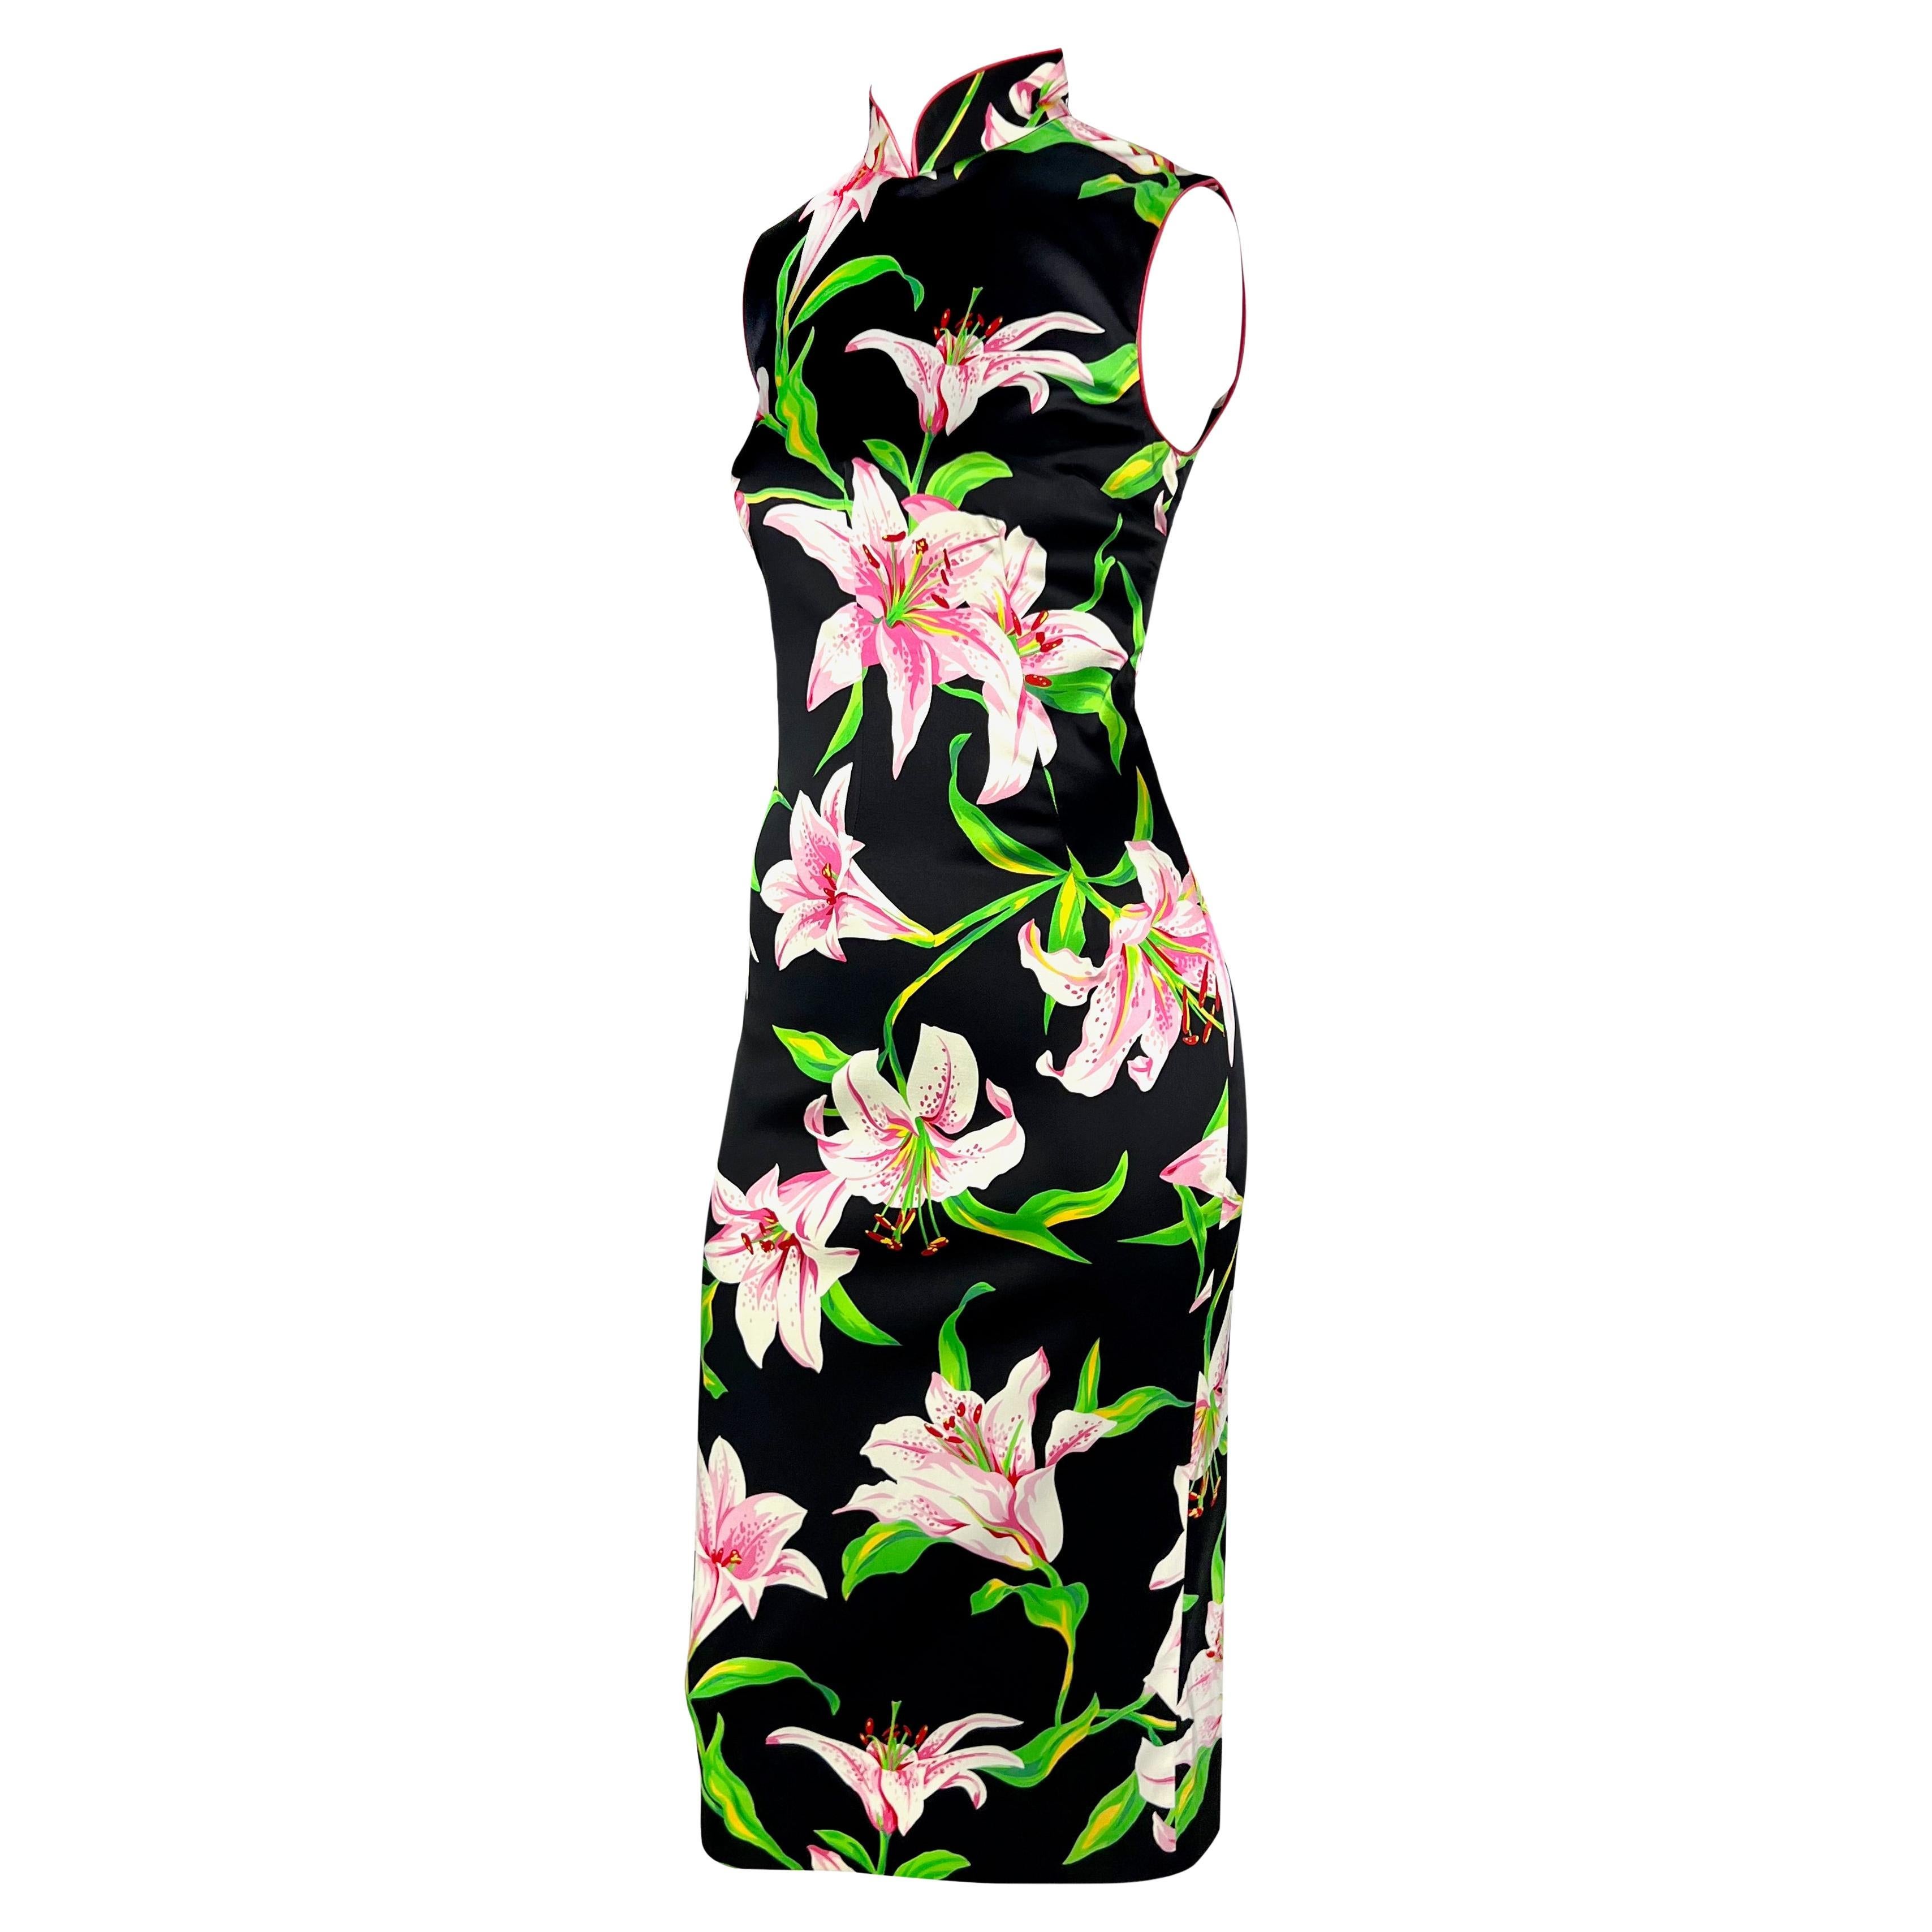 S/S 2001 Dolce & Gabbana Black Pink Lilly Print Bodycon Satin Sleeveless Dress In Excellent Condition For Sale In West Hollywood, CA